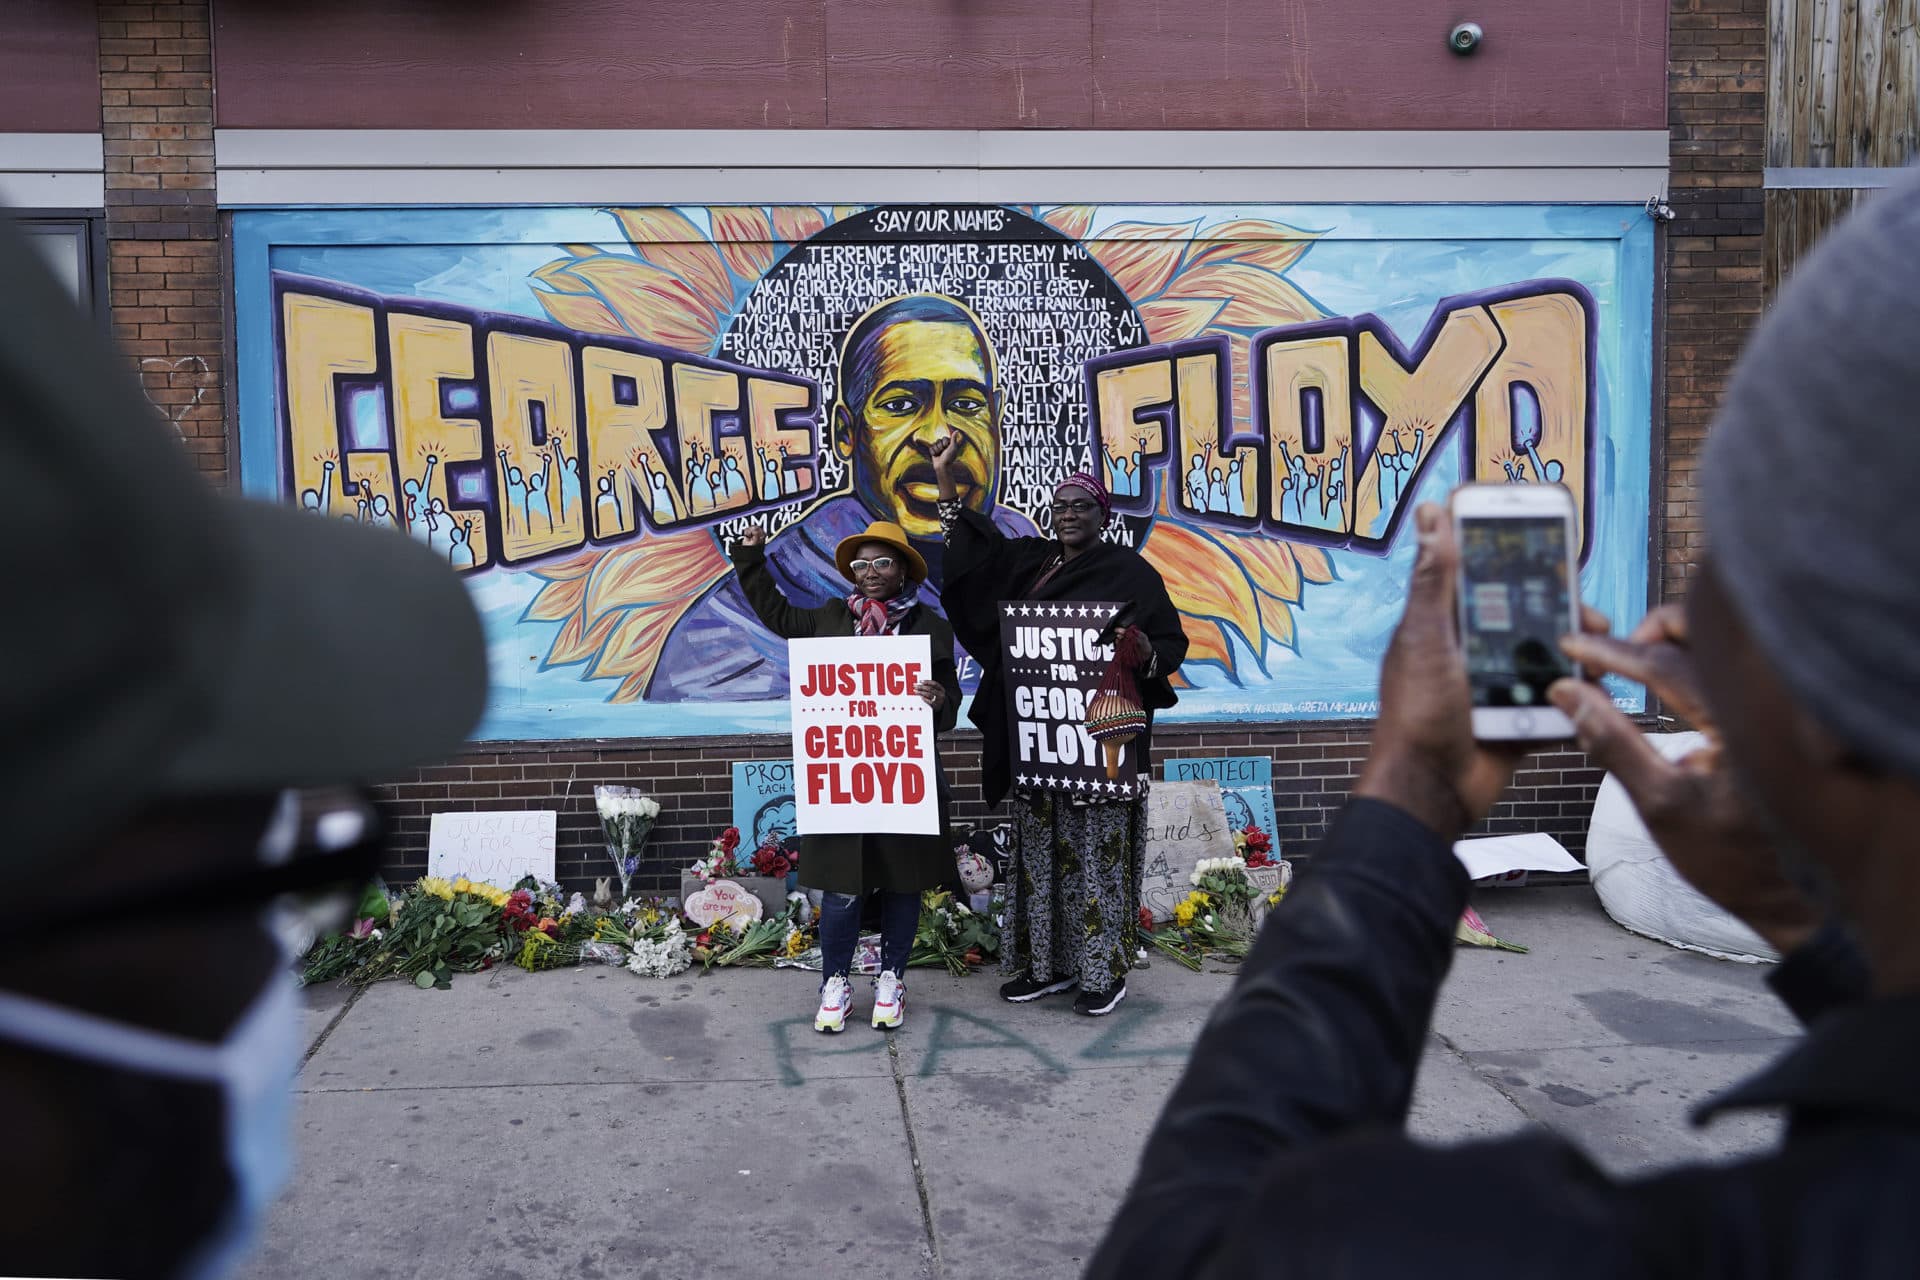 People pose for pictures in front of a mural for George Floyd. (Morry Gash/AP)